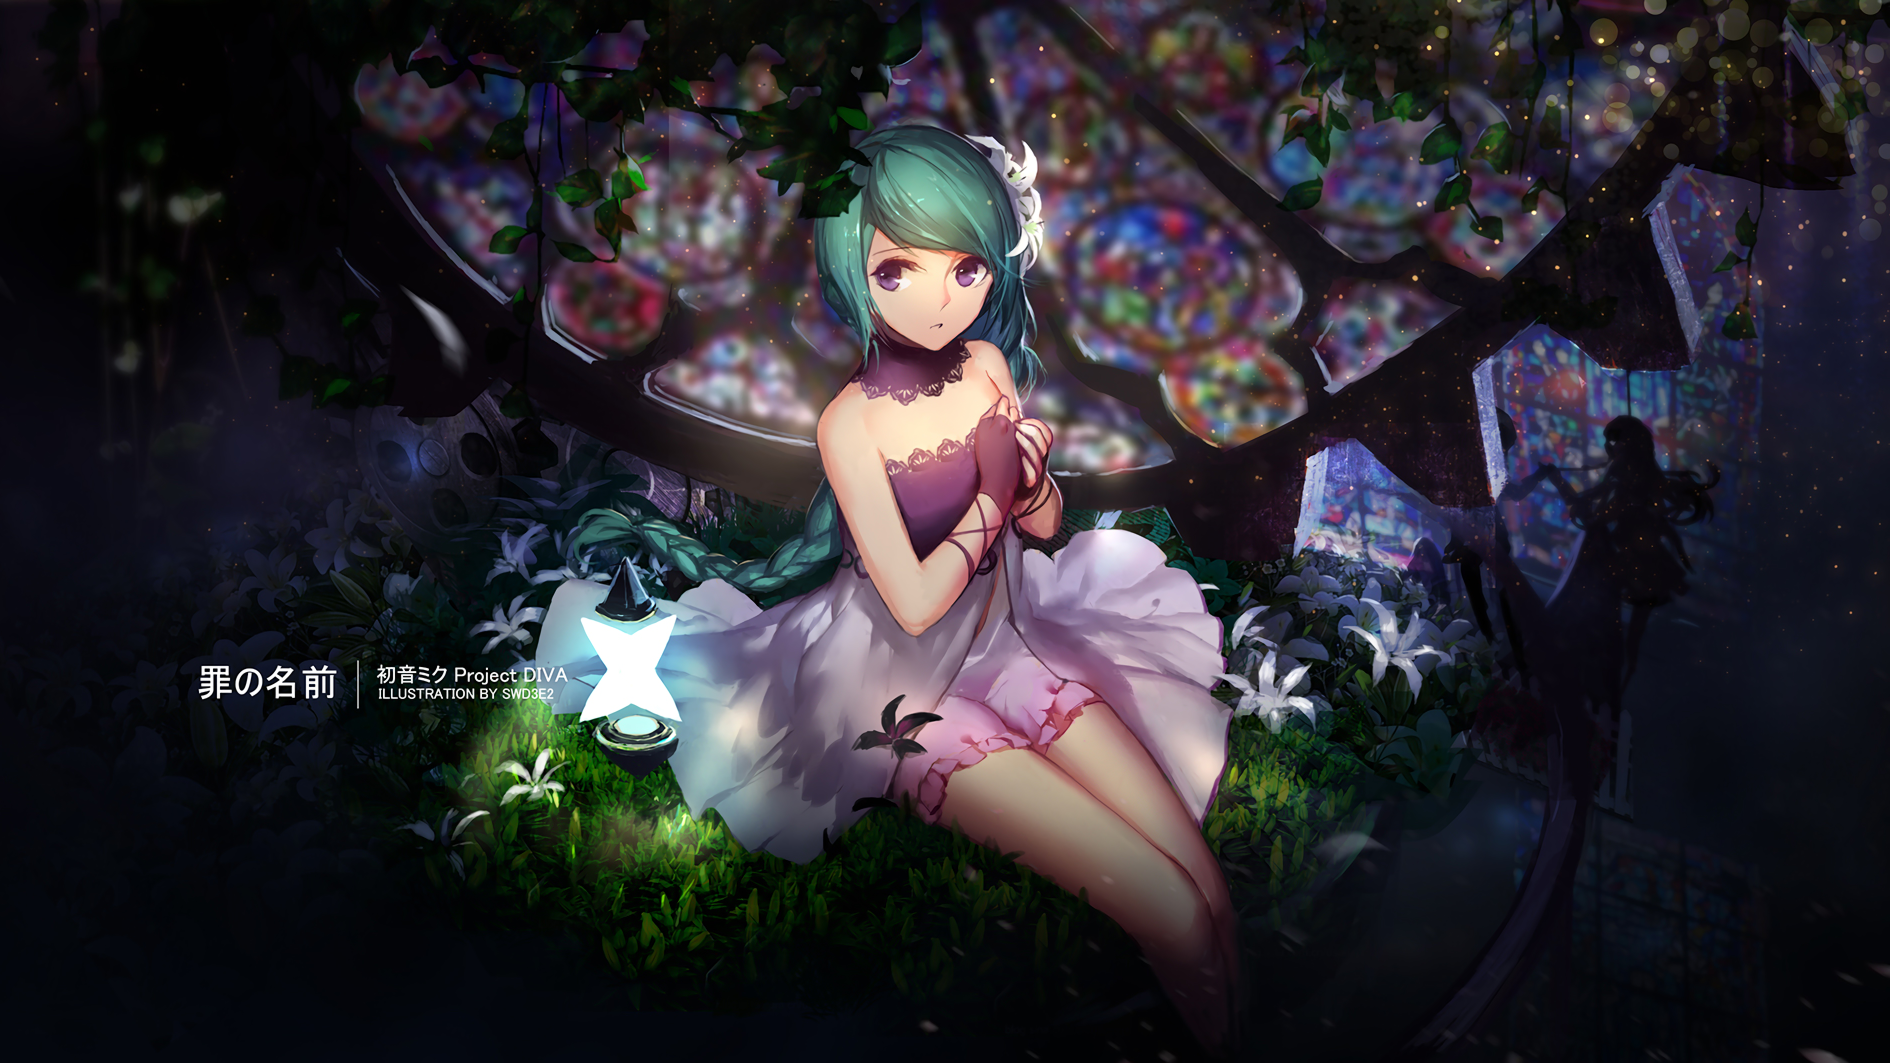 Anime 1890x1063 manga anime anime girls green hair dress knees together fantasy art fantasy girl purple eyes Gear Wheels stained glass looking at viewer